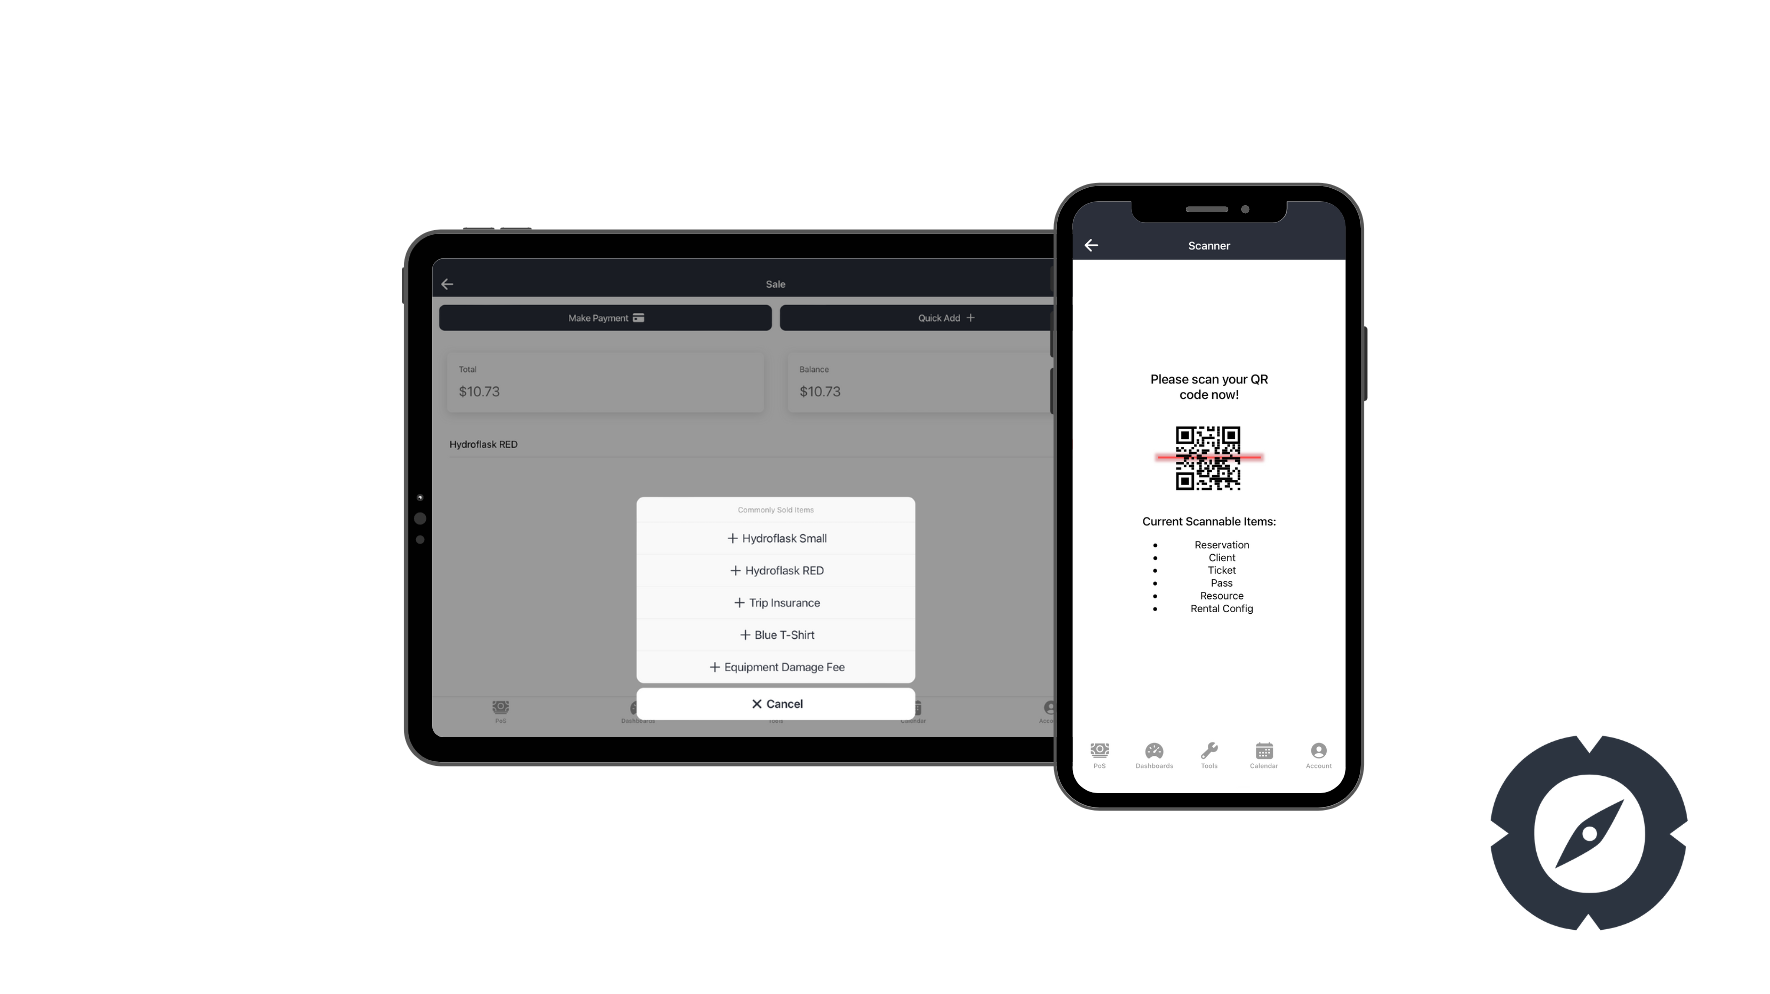 Top 4 Features of the Flybook Mobile App